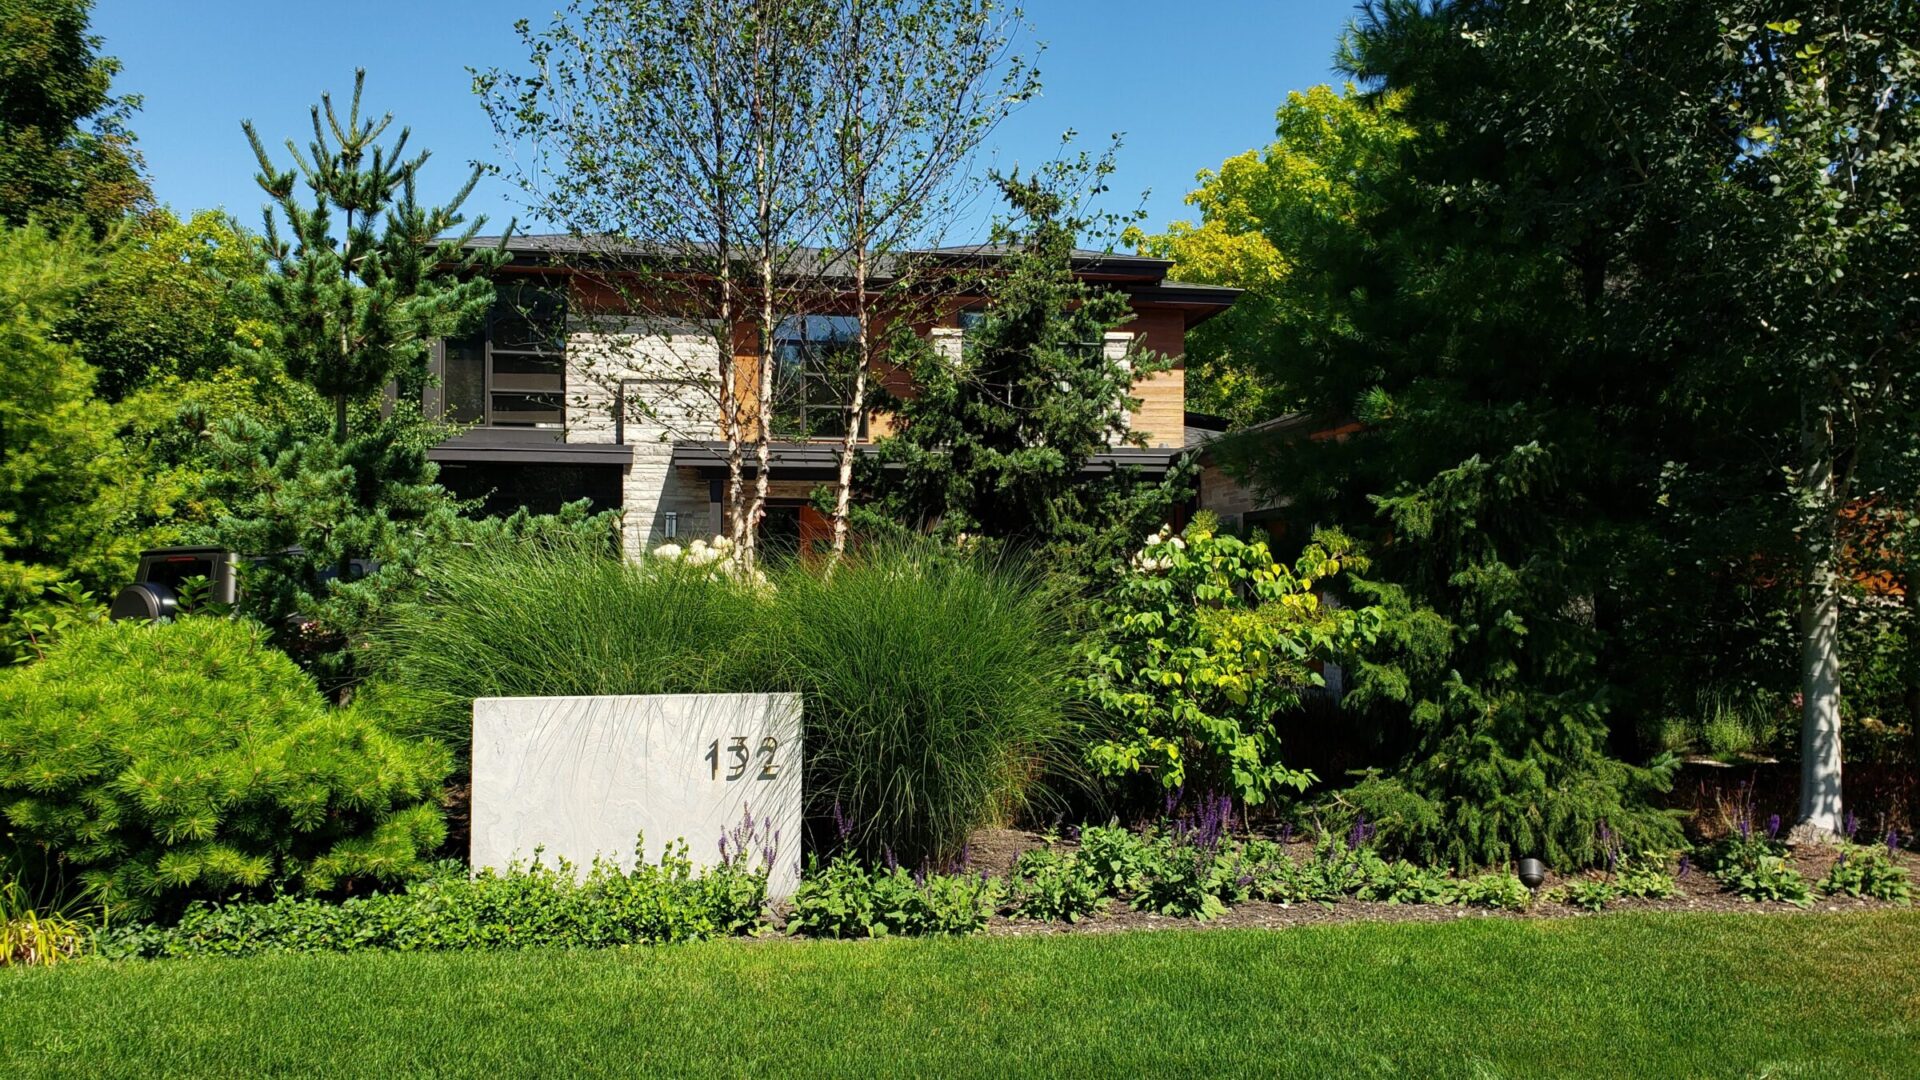 A well-maintained garden in front of a modern house with lush greenery, a variety of plants, and a prominent address stone marked 